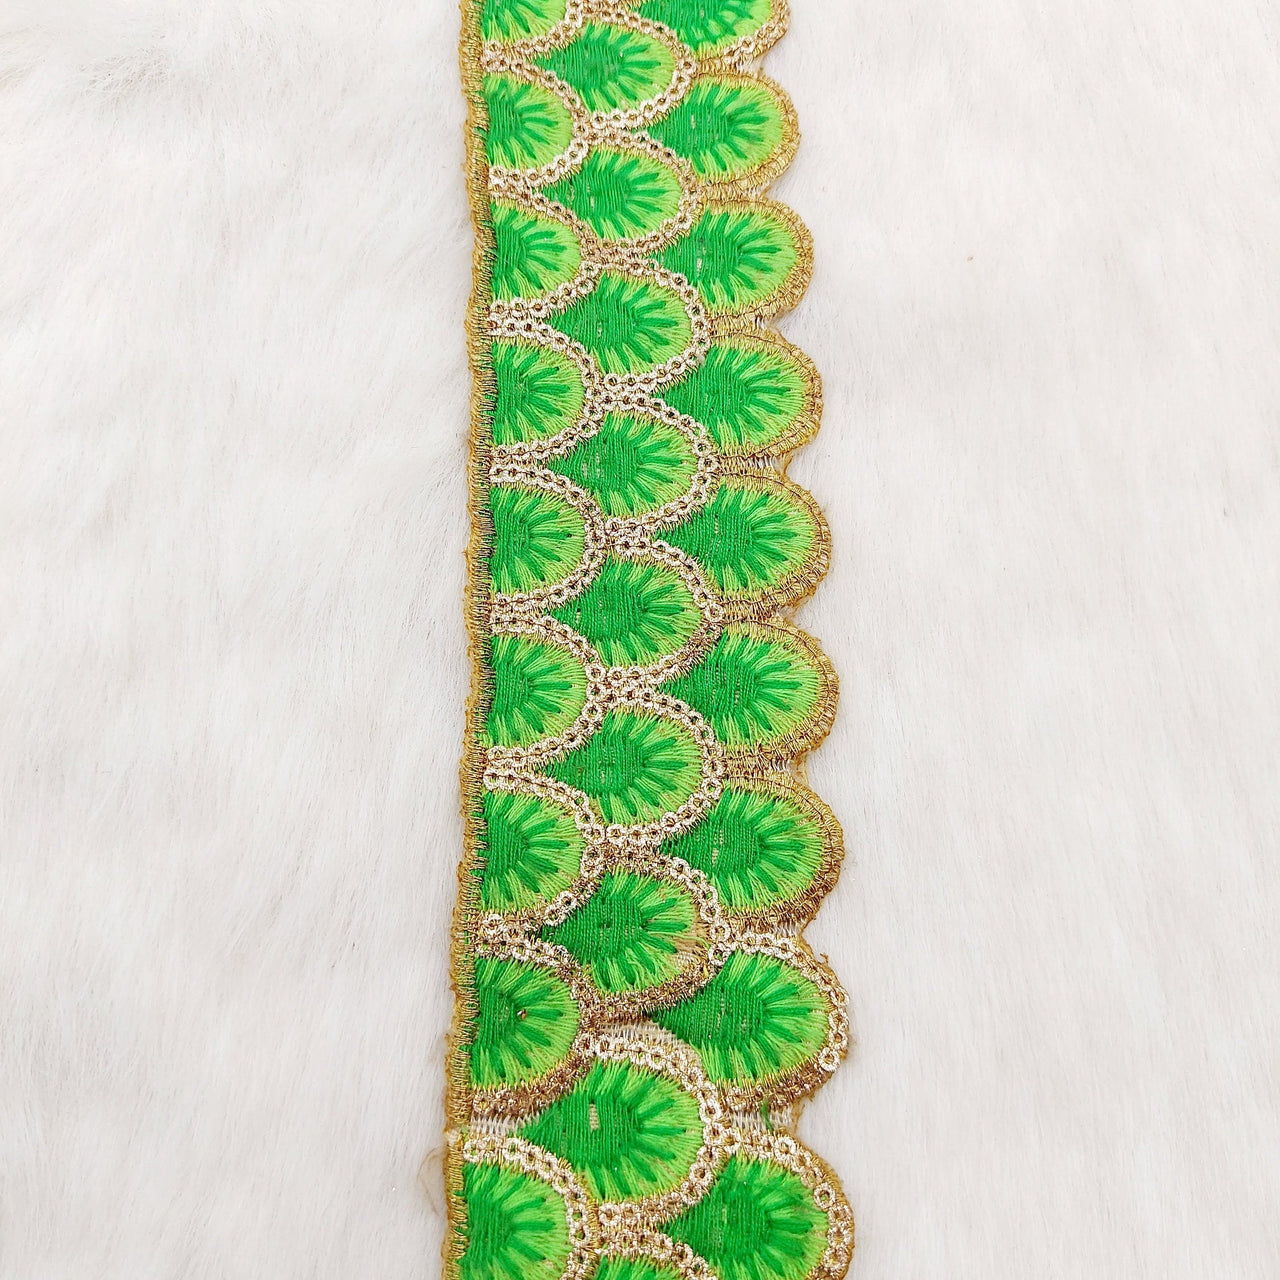 Trims: Green And Gold Embroidered Scallop Lace Trim, Approx. 50mm wide, Christmas Trim